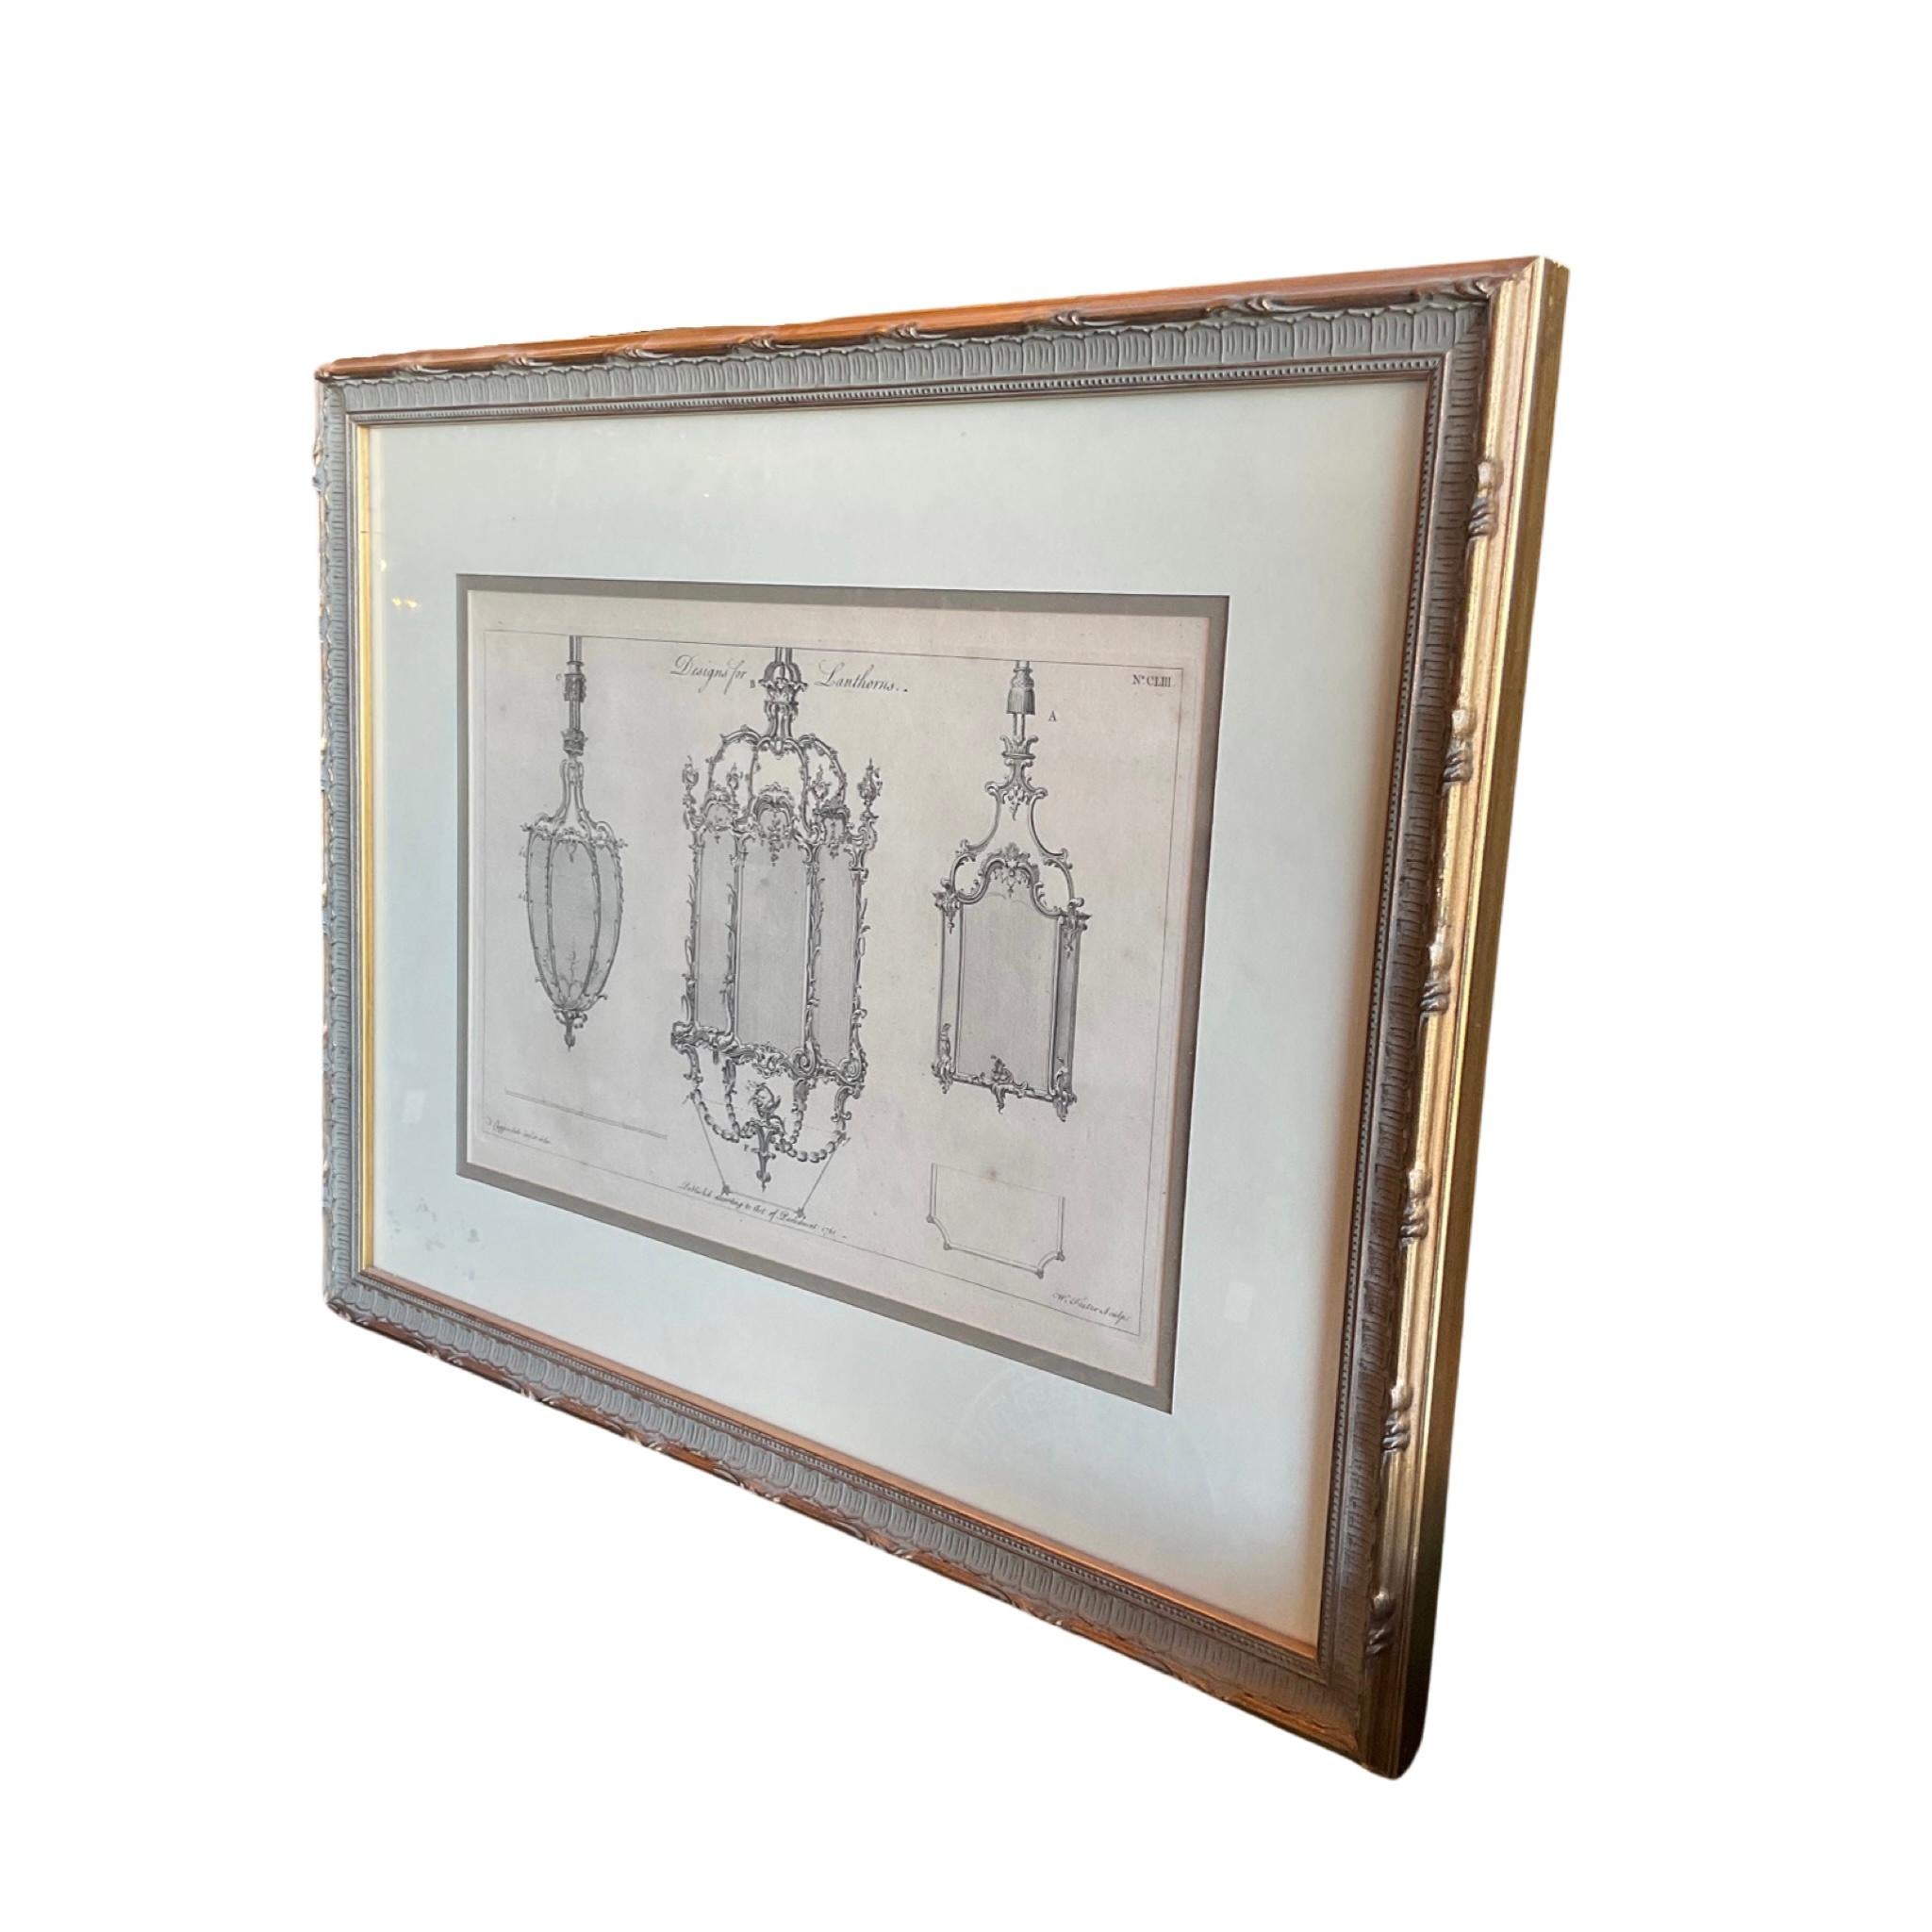 Framed Architectural sketch print of a lantern. Circa, 17th century. Originates from France. Signed and dated.